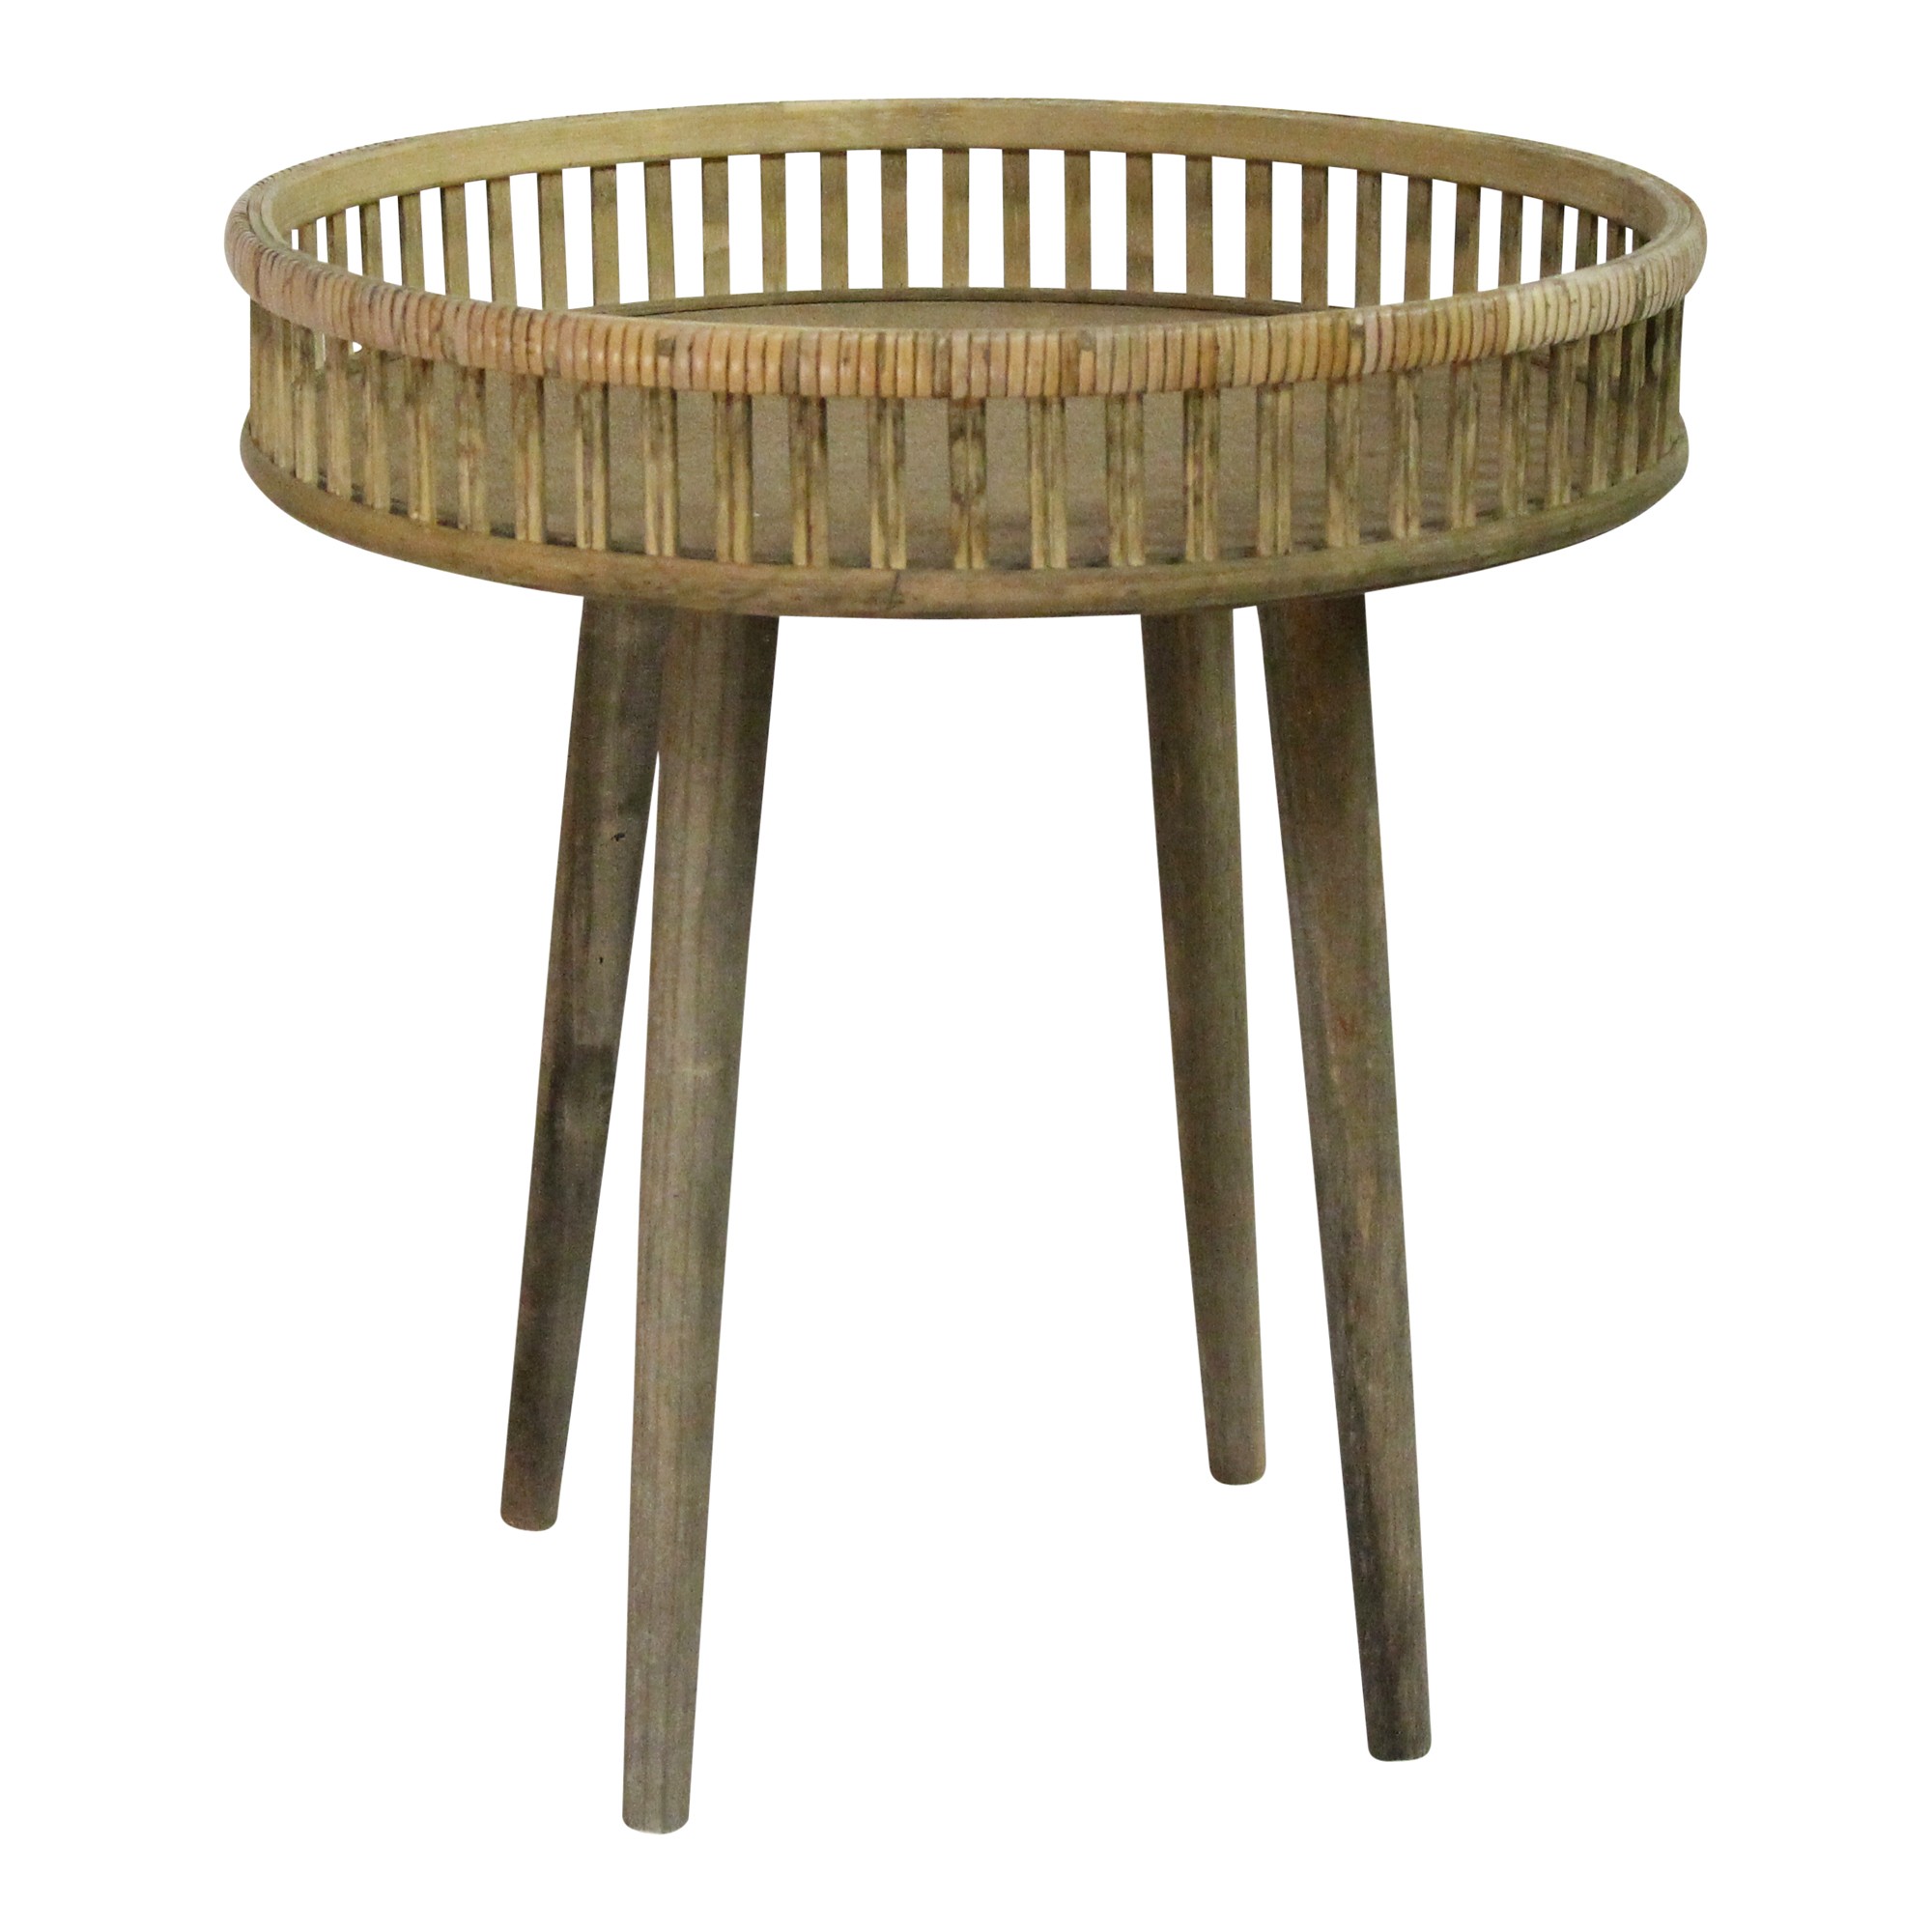 Distressed Rattan Brown Bamboo & Wood / Side Table